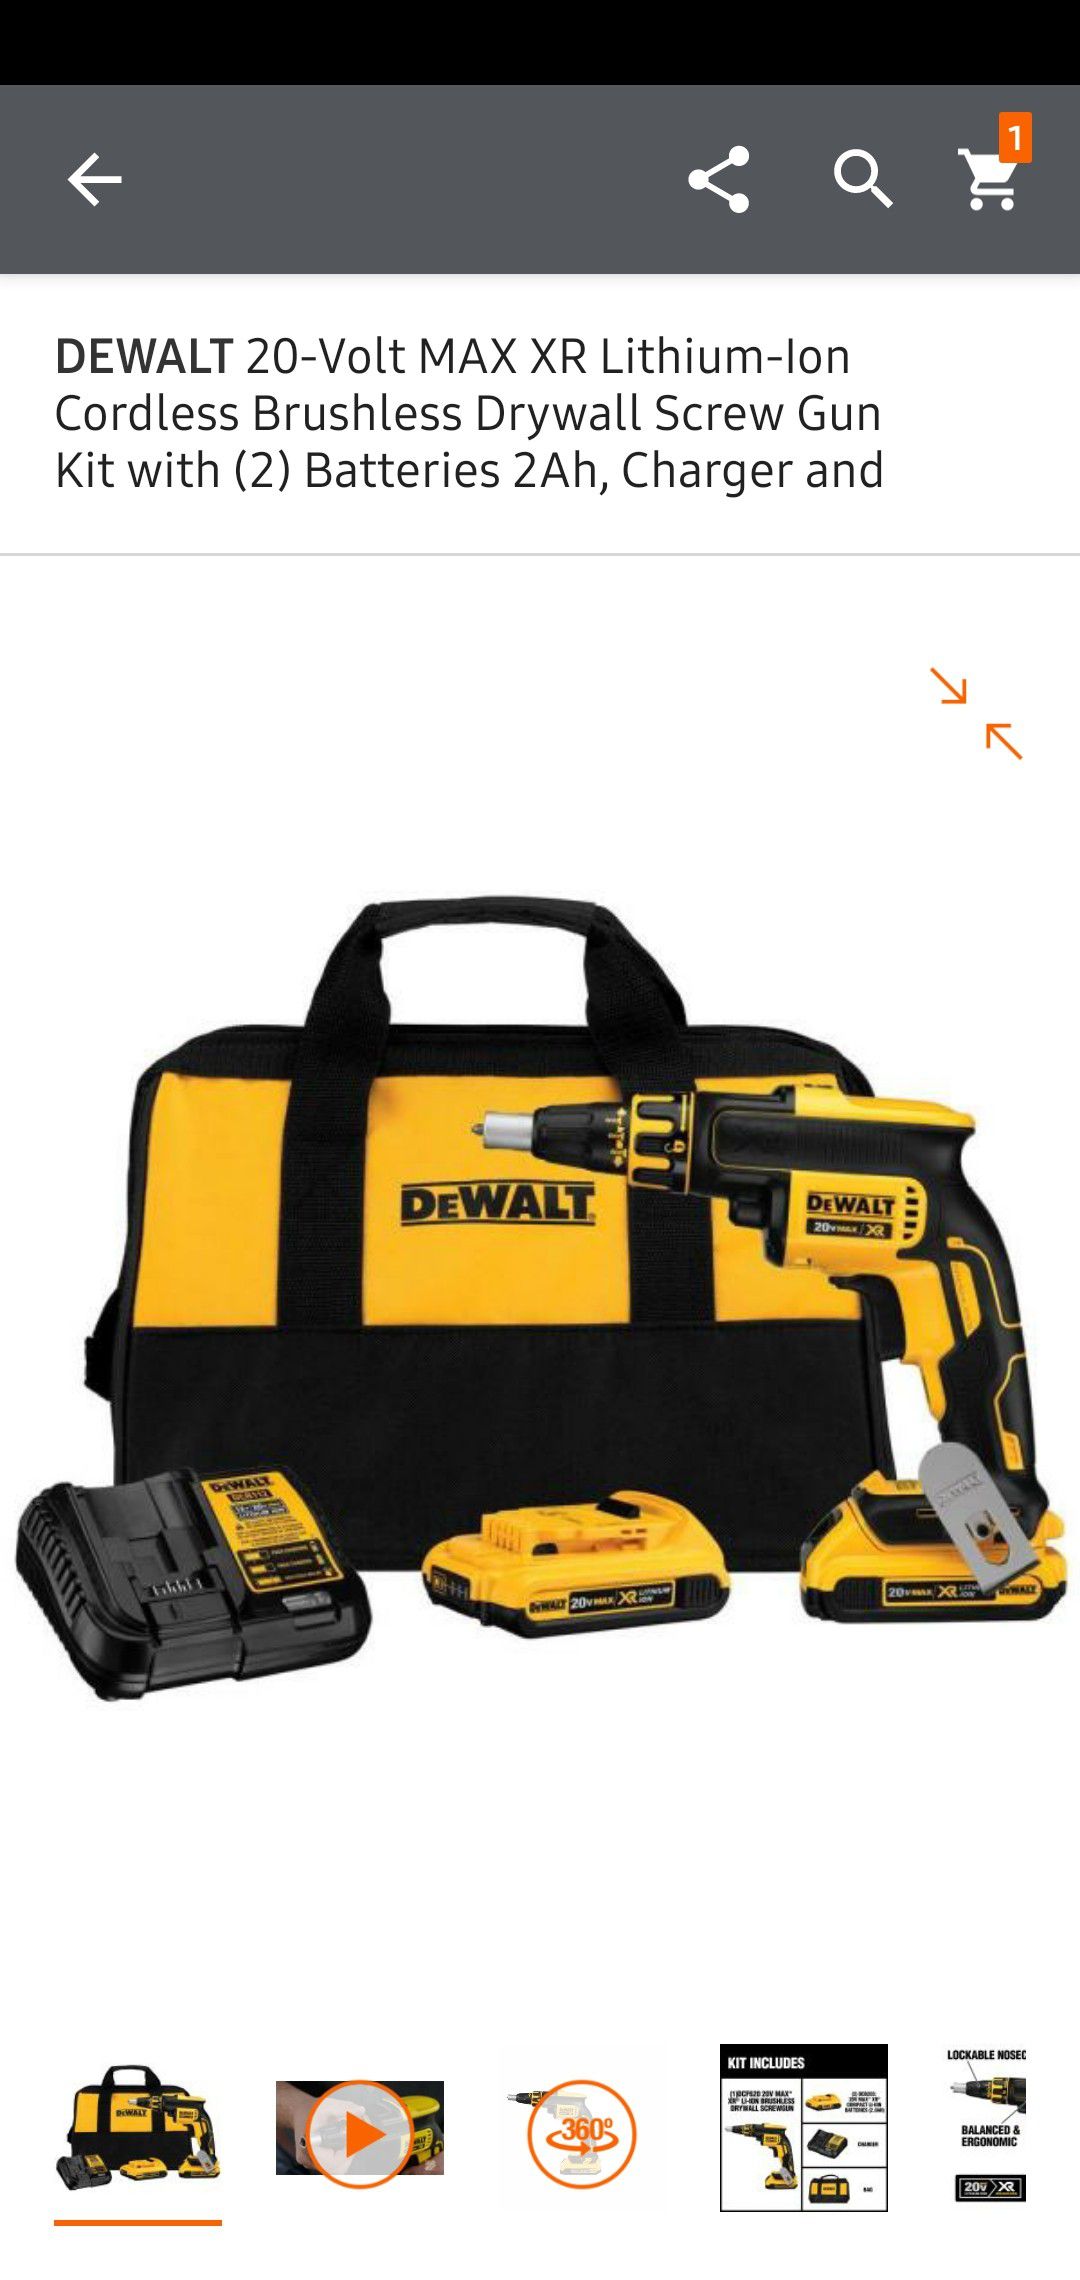 DEWALT 20-Volt MAX XR Lithium-Ion Cordless Brushless Drywall Screw Gun Kit with (2) Batteries 2Ah, Charger and Contractor Bag